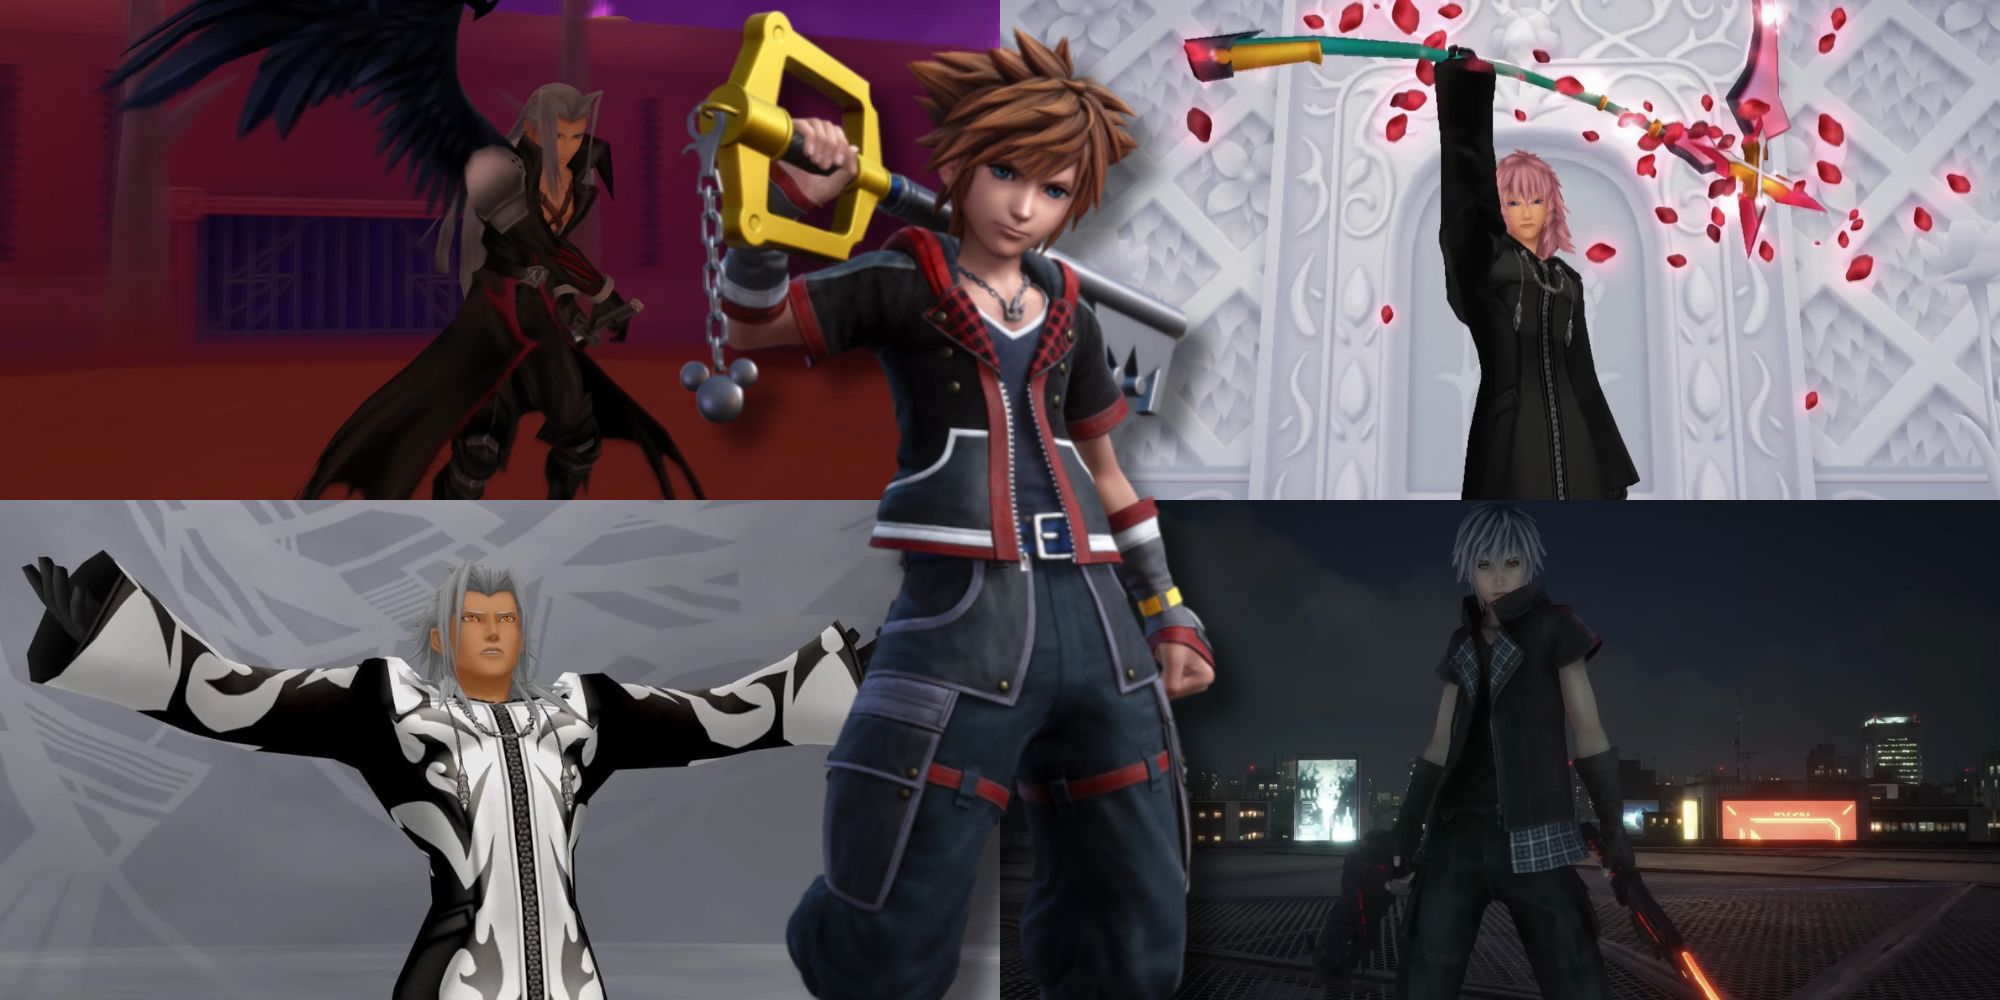 A collage of Sora alongside 4 of the best bosses in the Kingdom Hearts series: Sephiroth, Marluxia, Xemnas and Yozora.